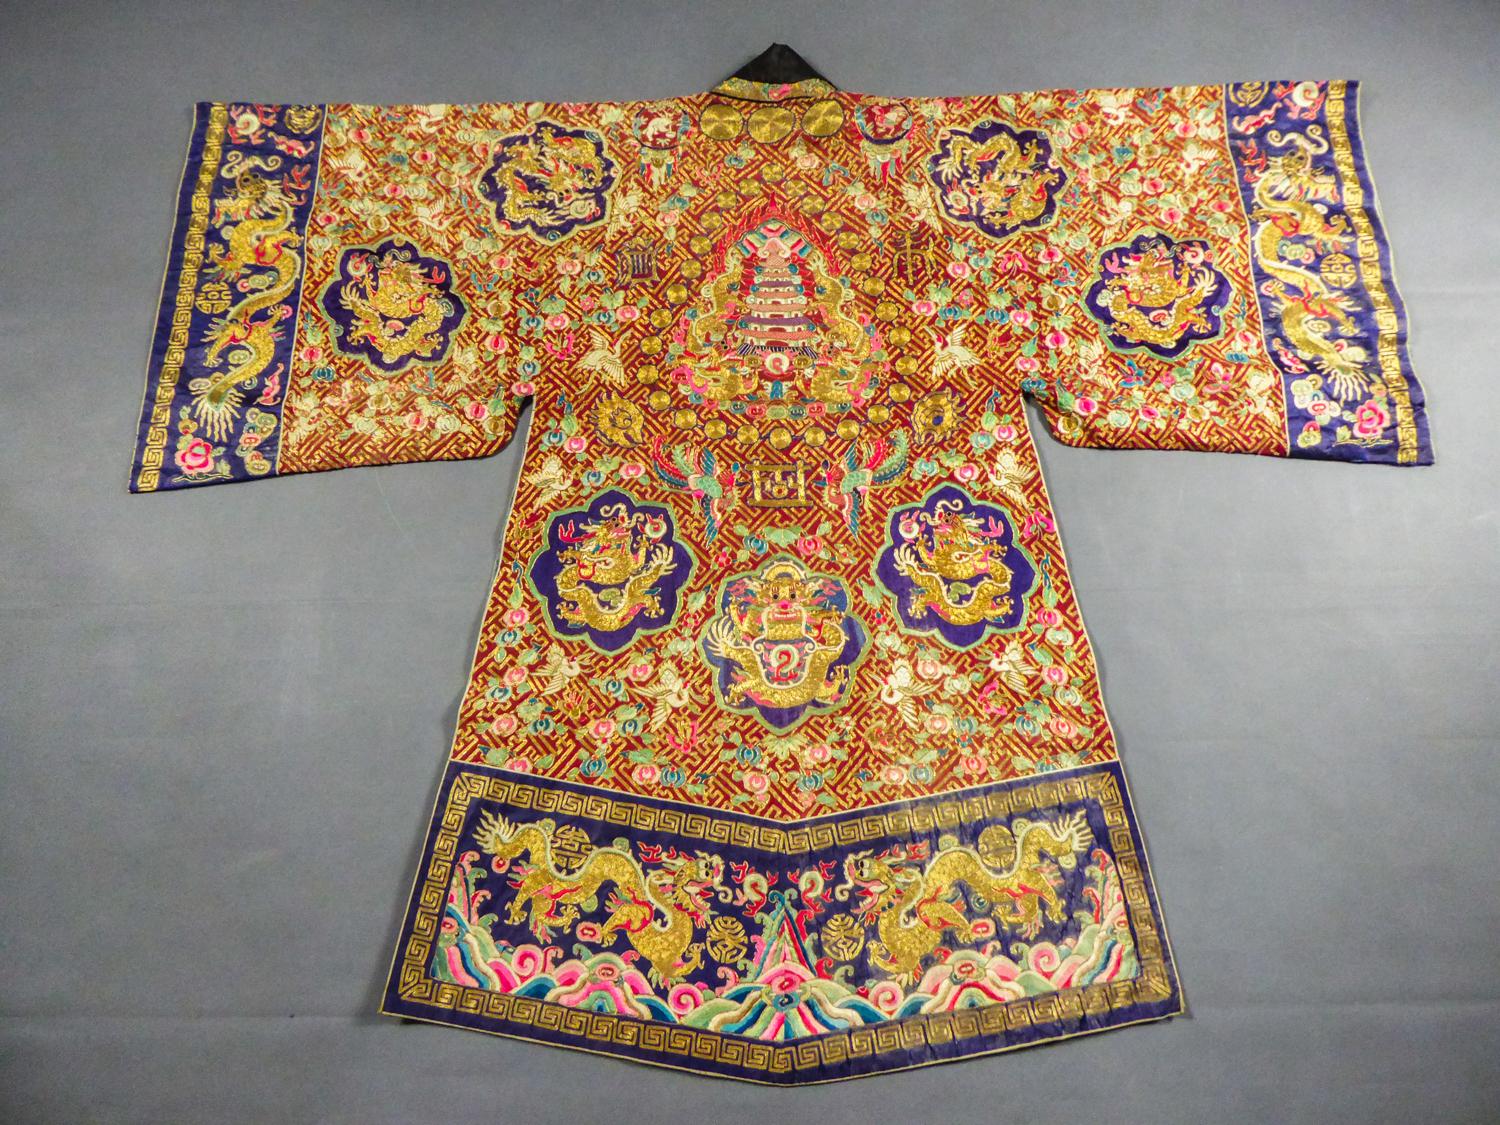 Winter 1874 (written in black ink on the lining)
China Qing Dynasty

Amazing ceremonial dress for Taoist Dignitary (Fa Yi) dated in black ink on the lining 